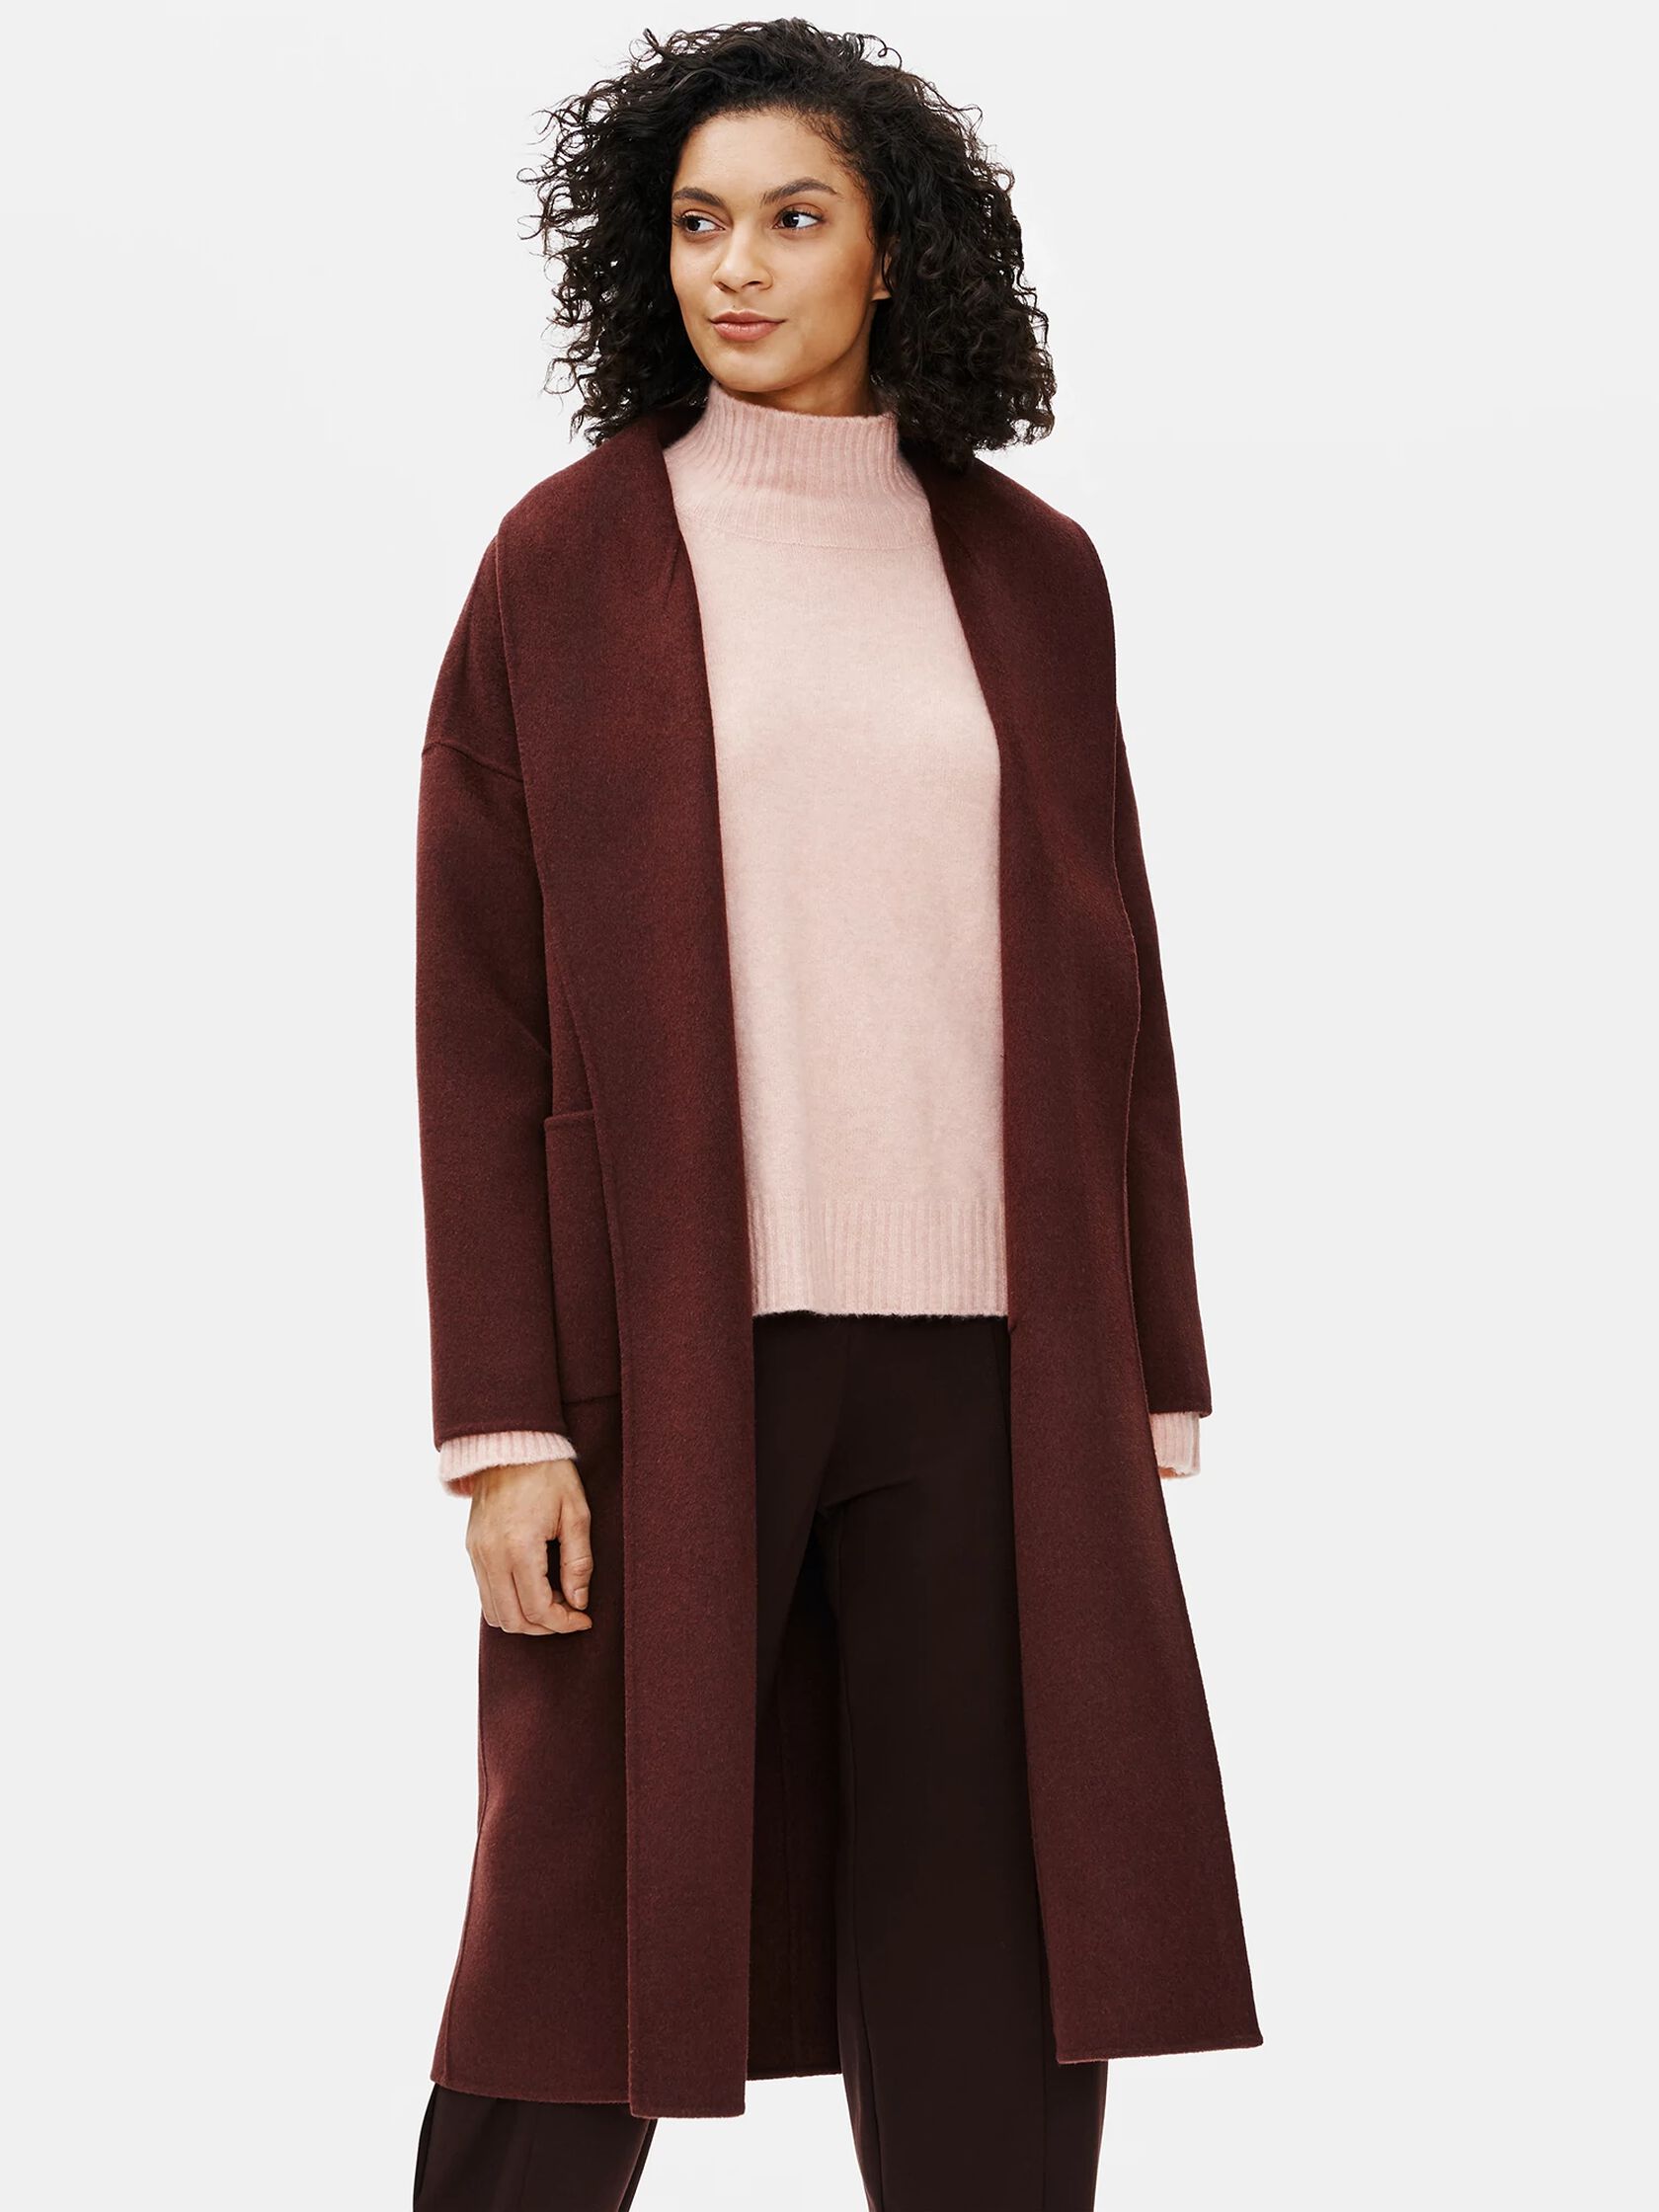 Doubleface Wool Cashmere Shawl Collar Coat